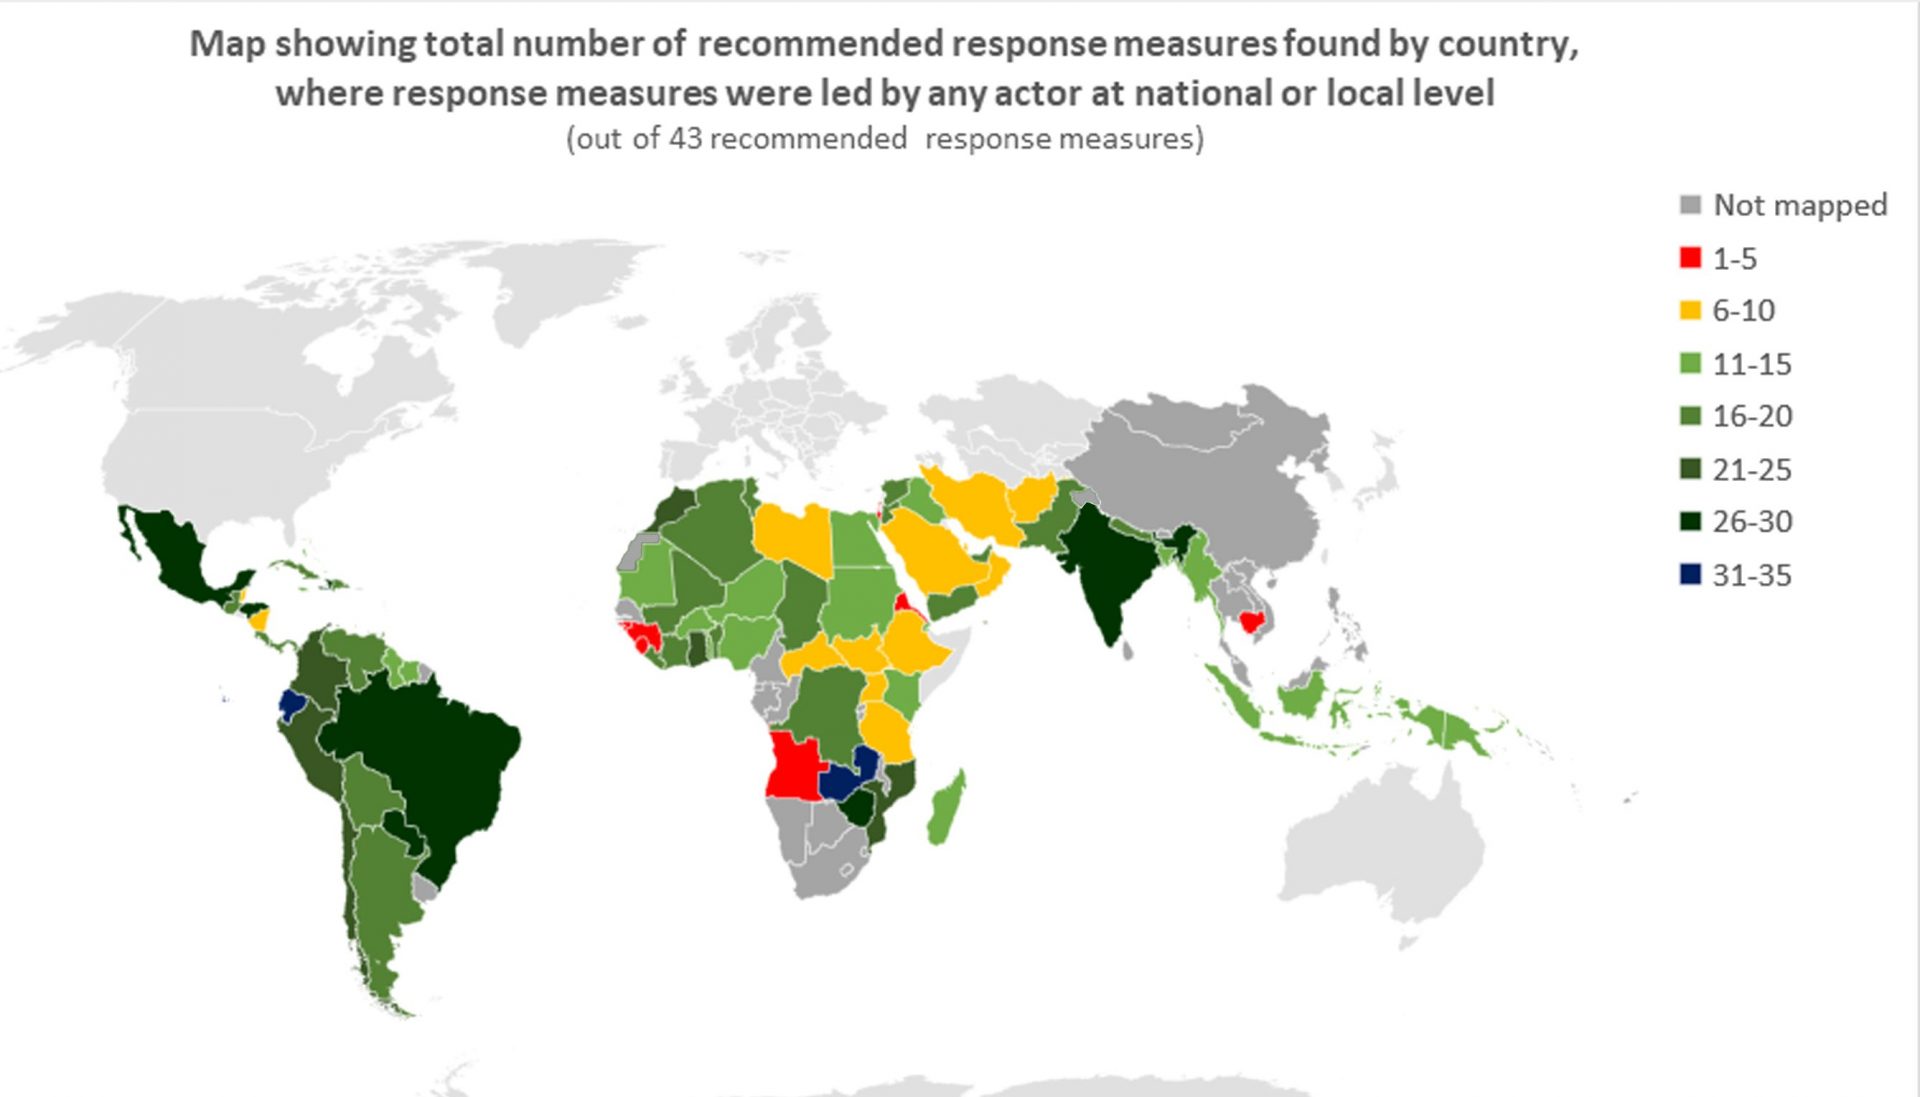 World map showing total number of recommended response measures by country, initiated at local or national levels